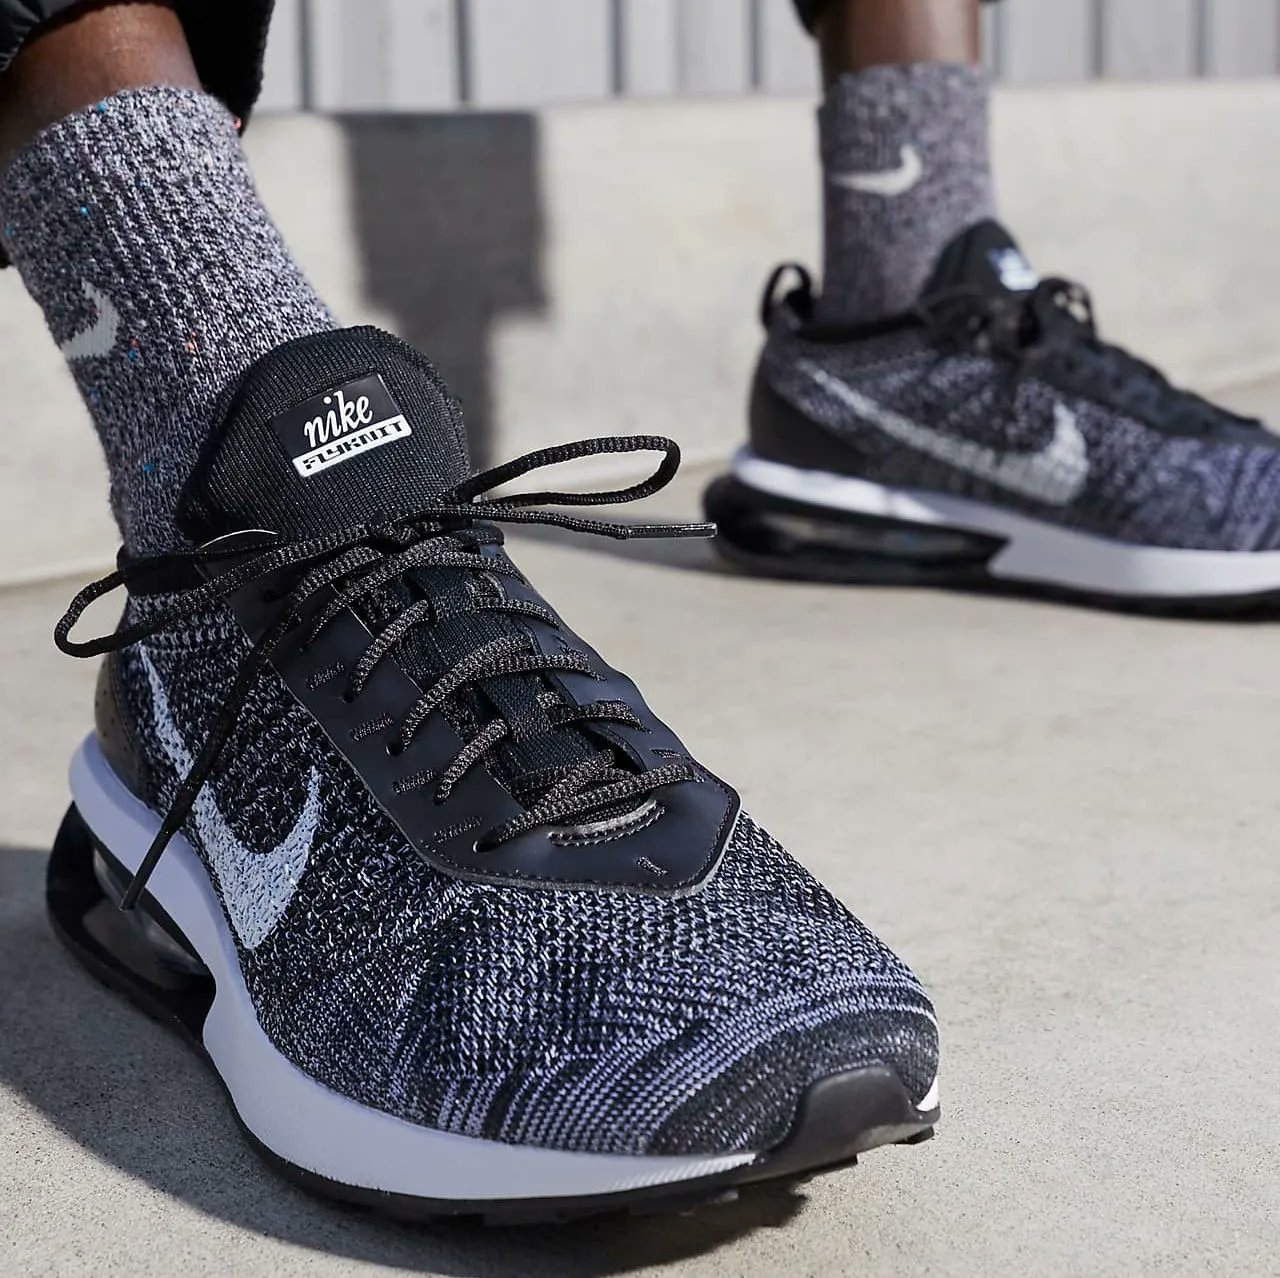 KicksFinder on Twitter: STEAL via FNL/JD Nike Air Max Flyknit "Oreo" $65 + Free shipping and returns FNL https://t.co/z2A6j1RDMP JD &gt;&gt; https://t.co/KyrtcGzDar https://t.co/52BW3EO9uc" / Twitter